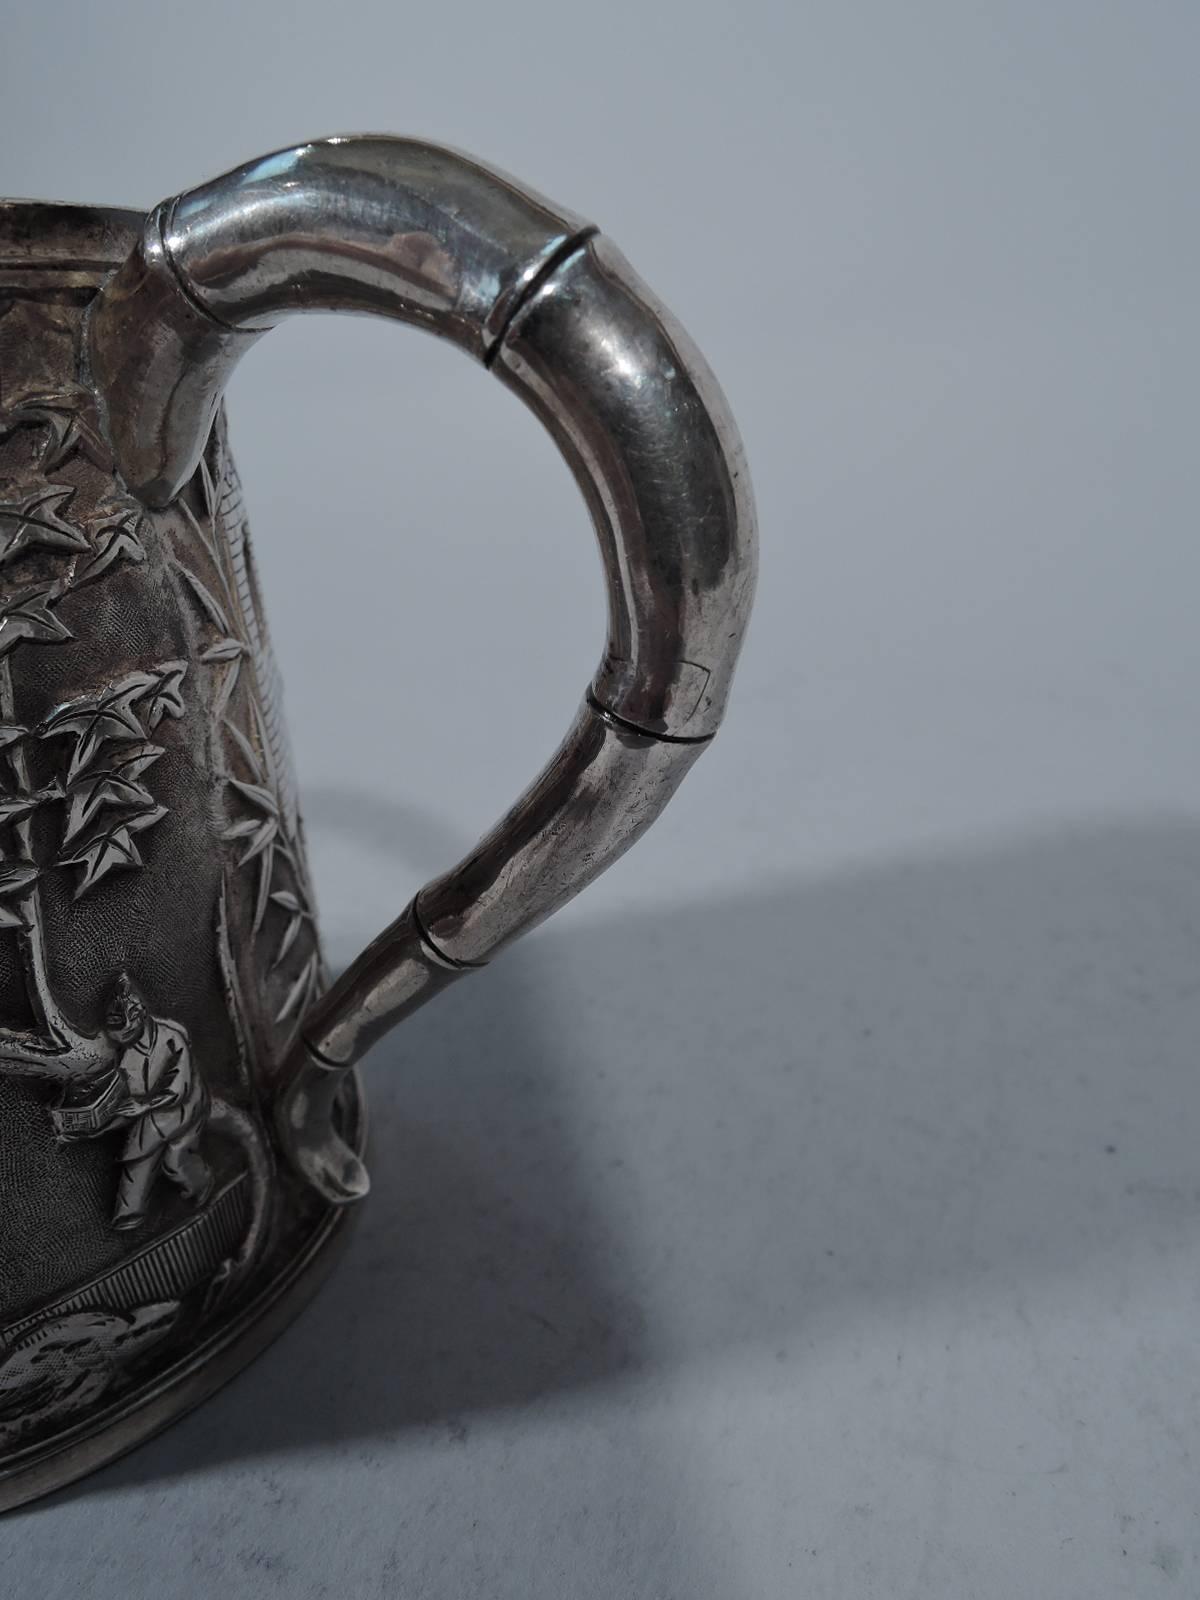 19th Century Chinese Export Silver Christening Mug with Exotic Scenes